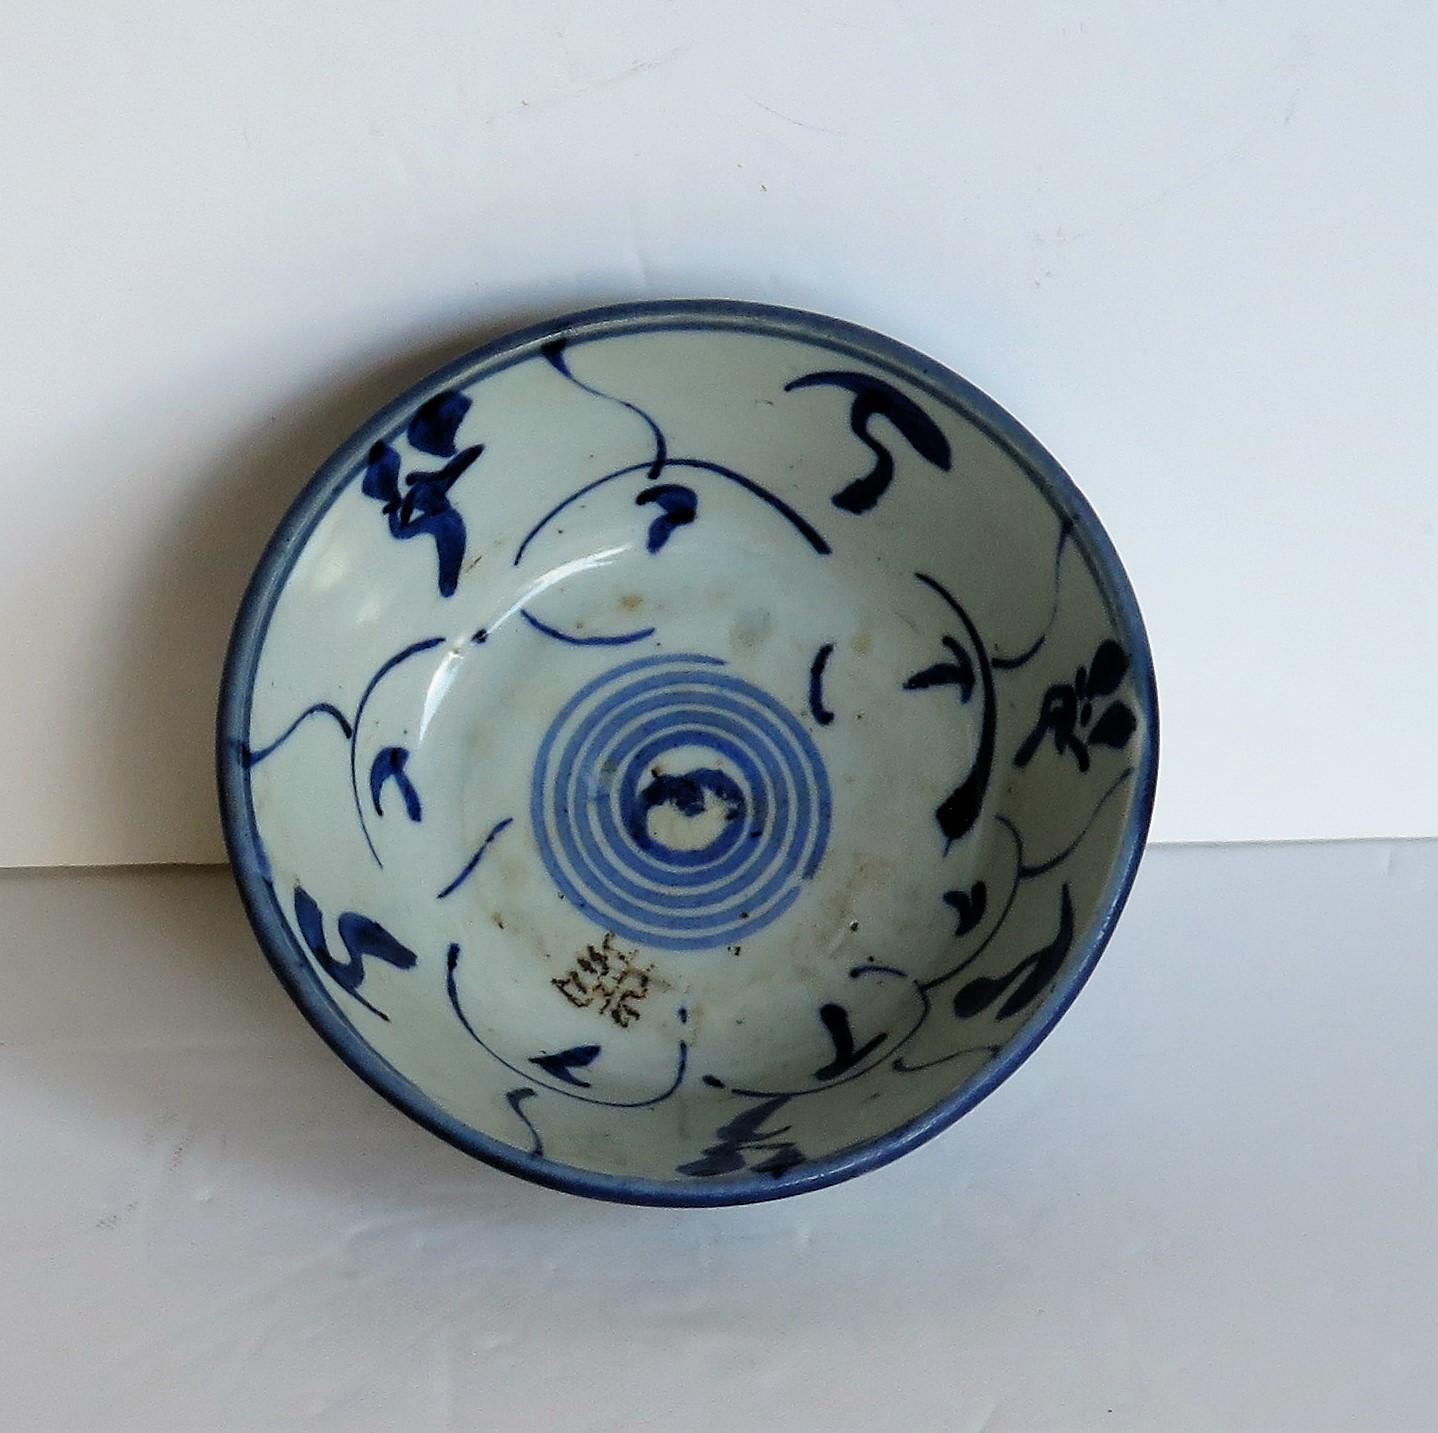 Chinese Porcelain Bowl Hand Painted Blue and White, 17th Century Ming Export For Sale 4